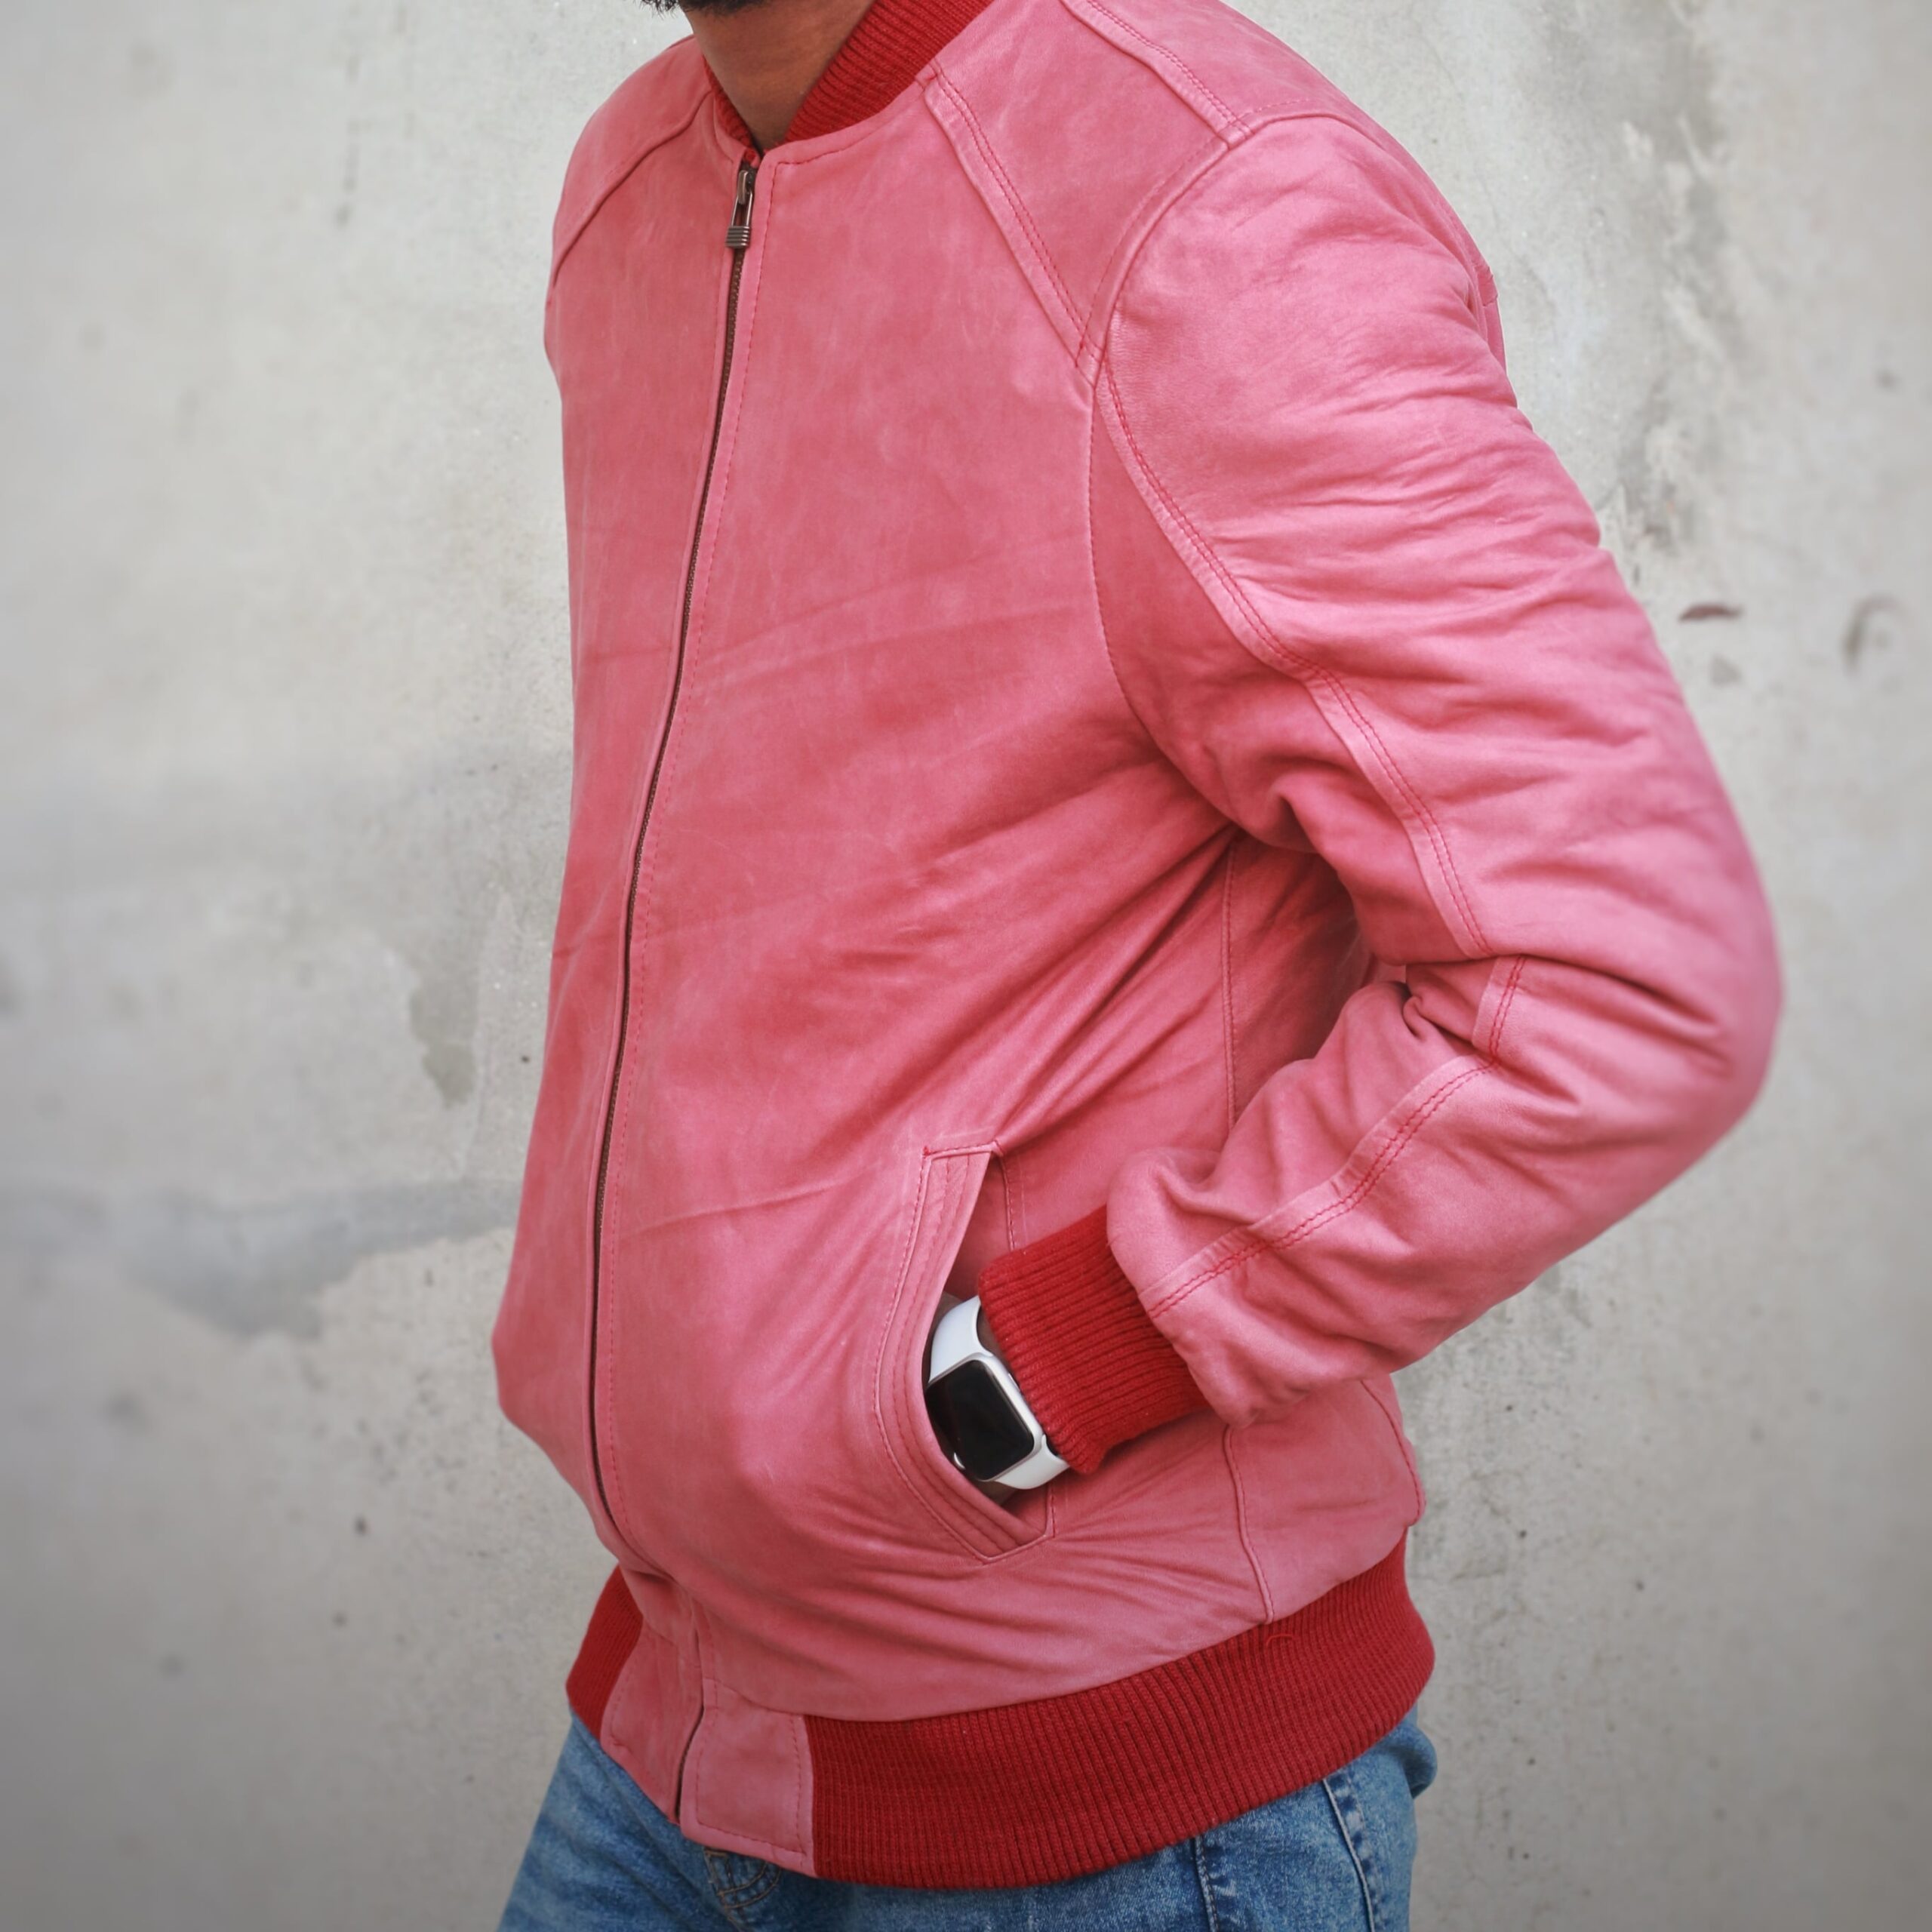 Suede Bomber Jacket Collection: Pink, Brown, Blue - Shop Now!